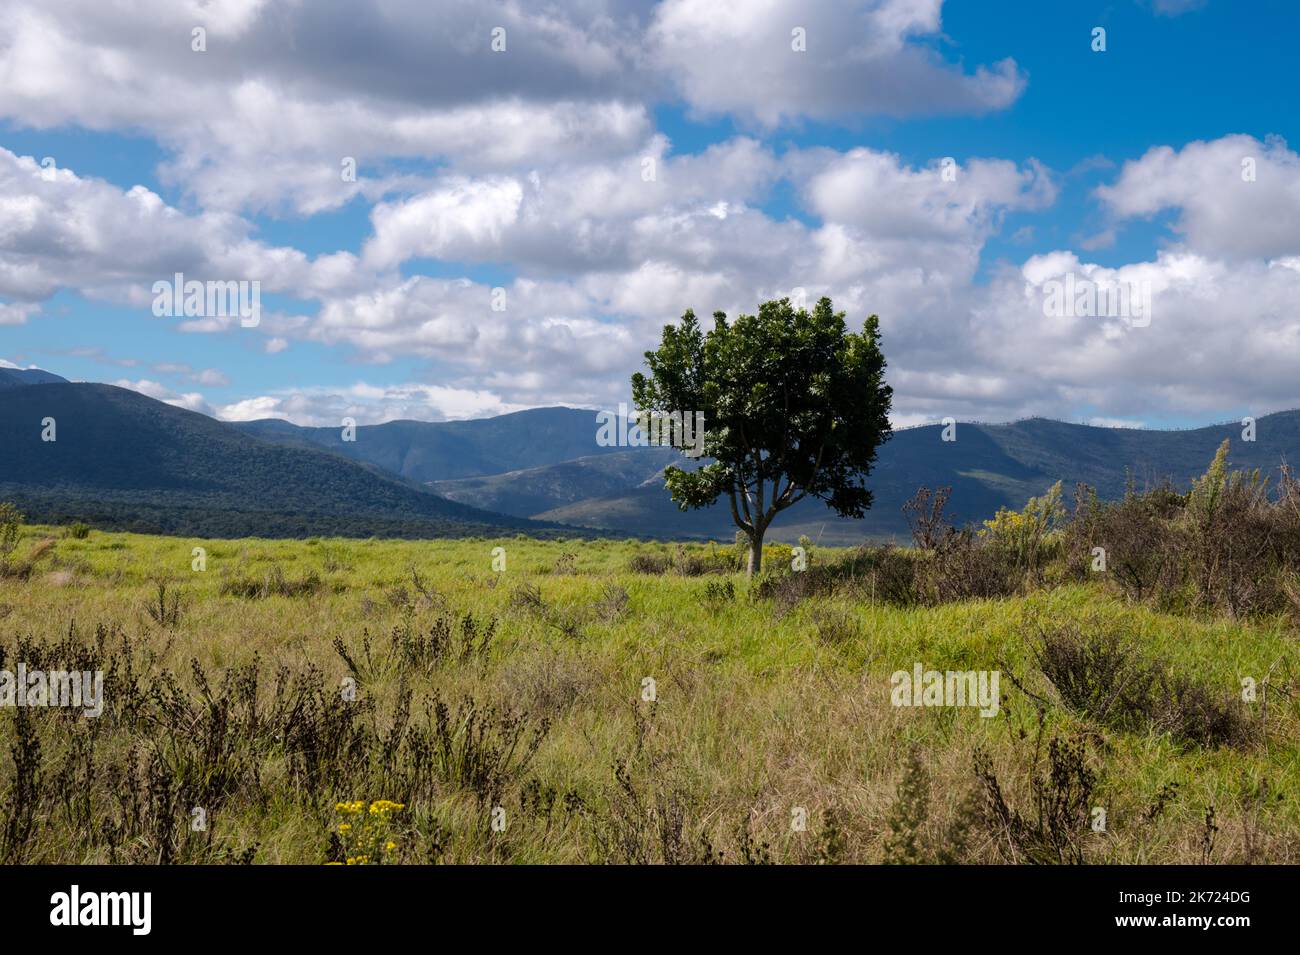 Colorful and Sunny landscape in Eastern cape with green indigenous fynbos or brushing and mountain range in background Stock Photo